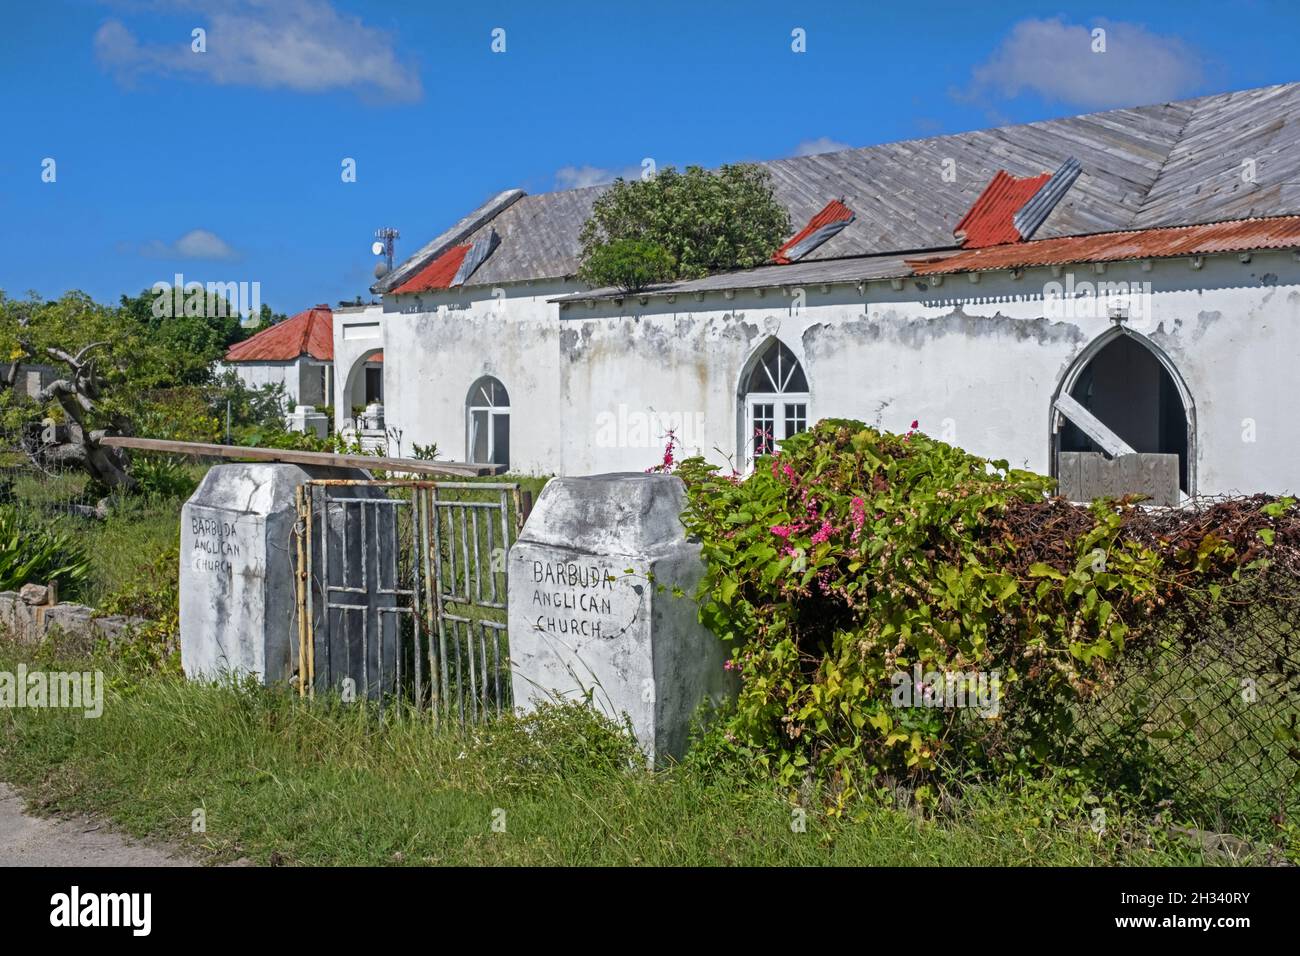 Damaged Holy Trinity Anglican Church after 2017 Hurricane Irma devastated the island of Barbuda, West Indies in the Caribbean Sea Stock Photo